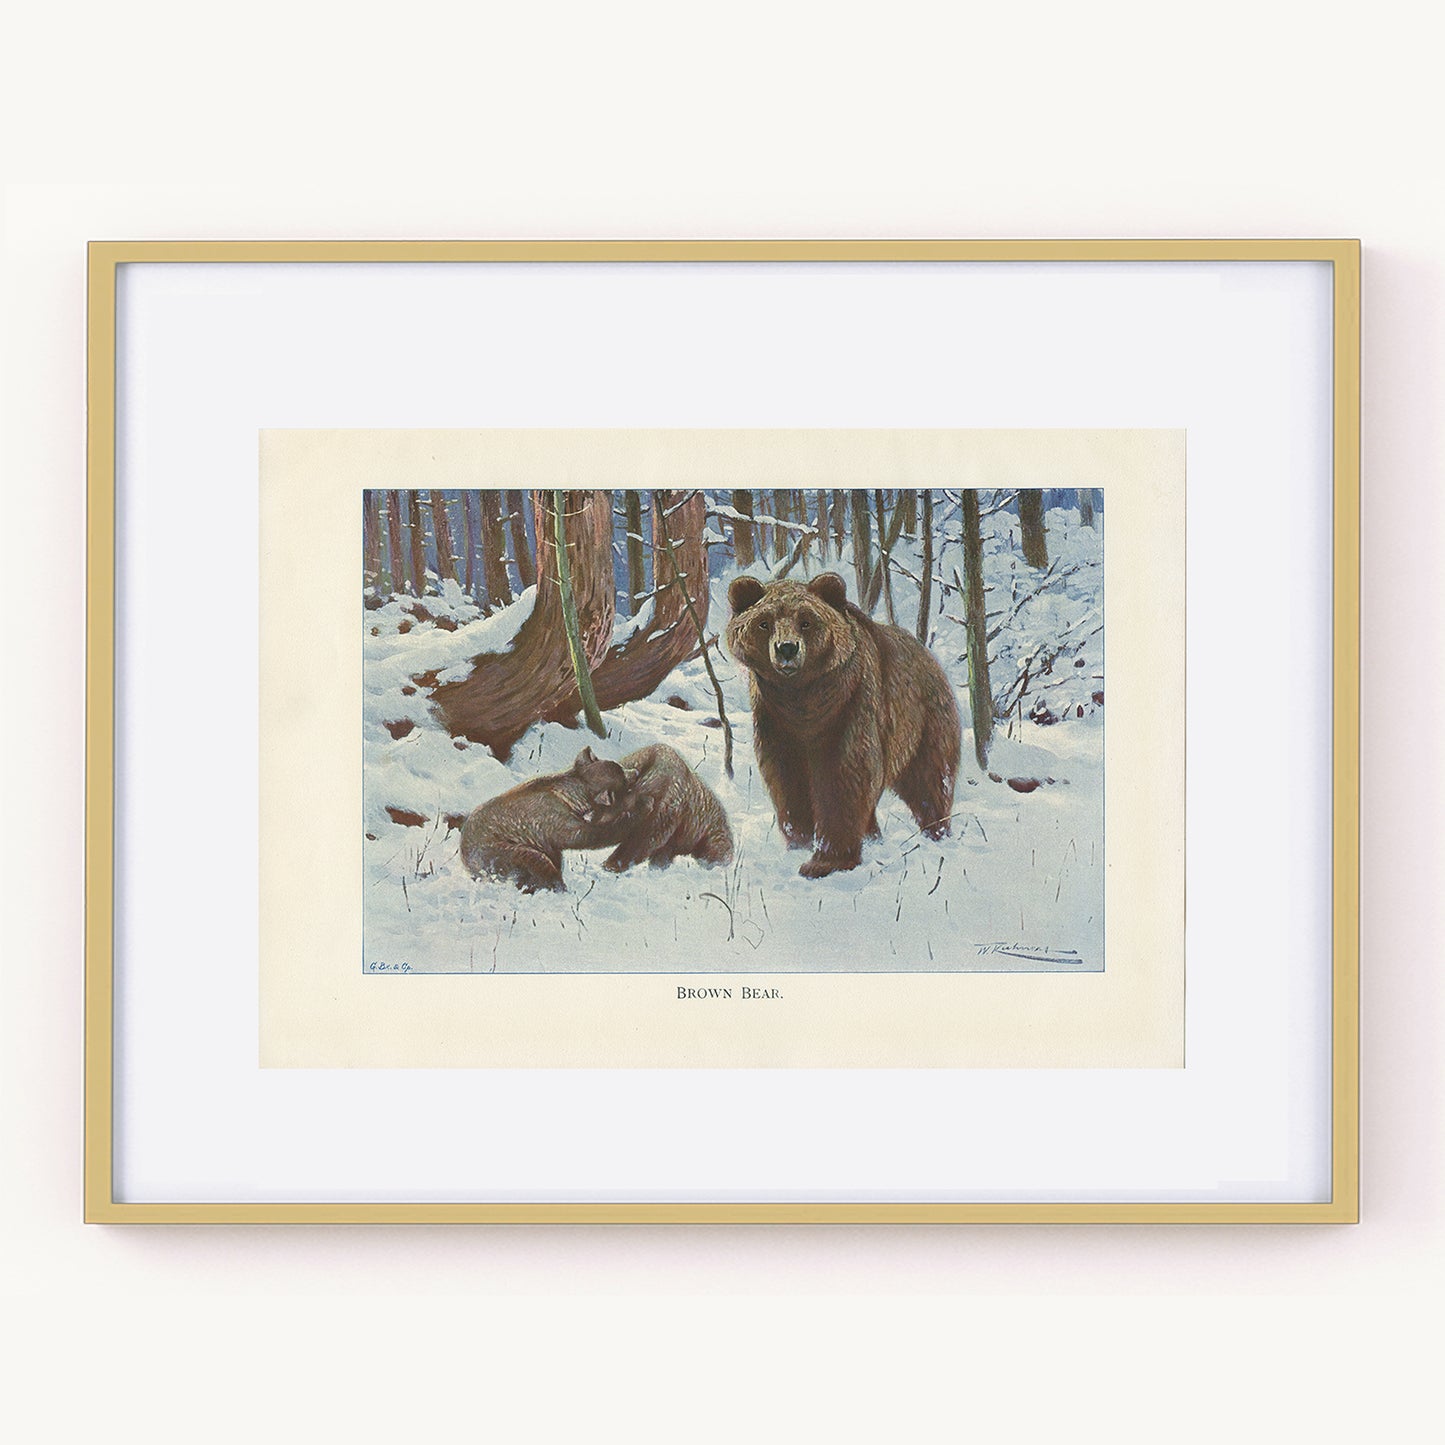 1916 Brown Bear poster with cubs